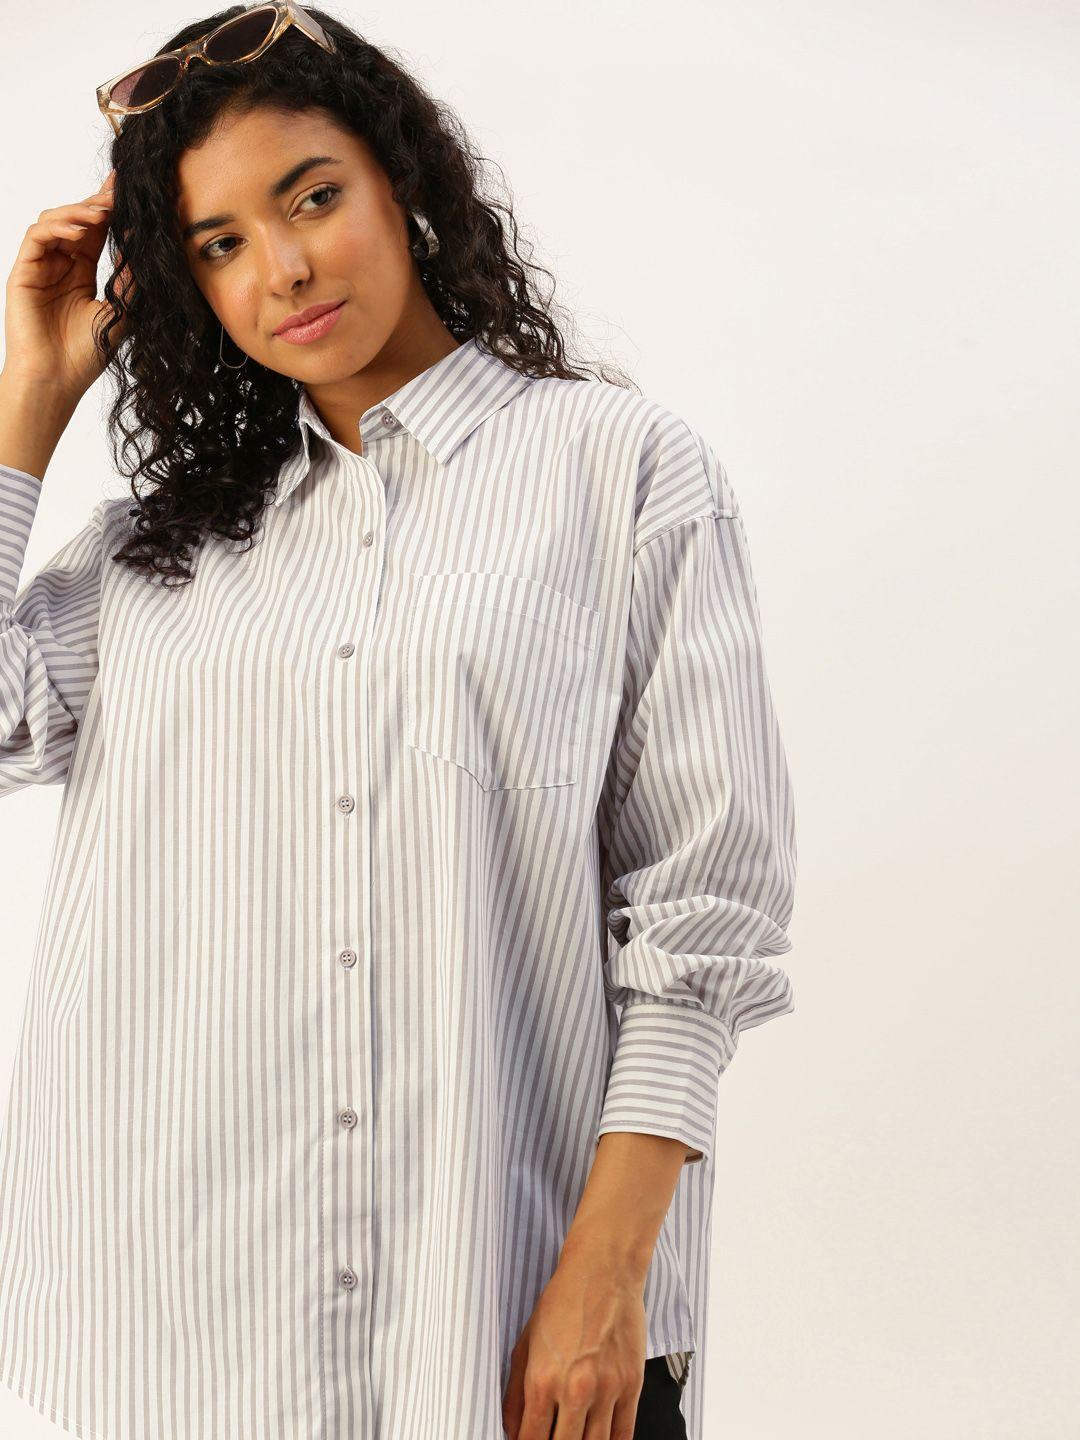 forever 21 striped cotton shirt style longline top